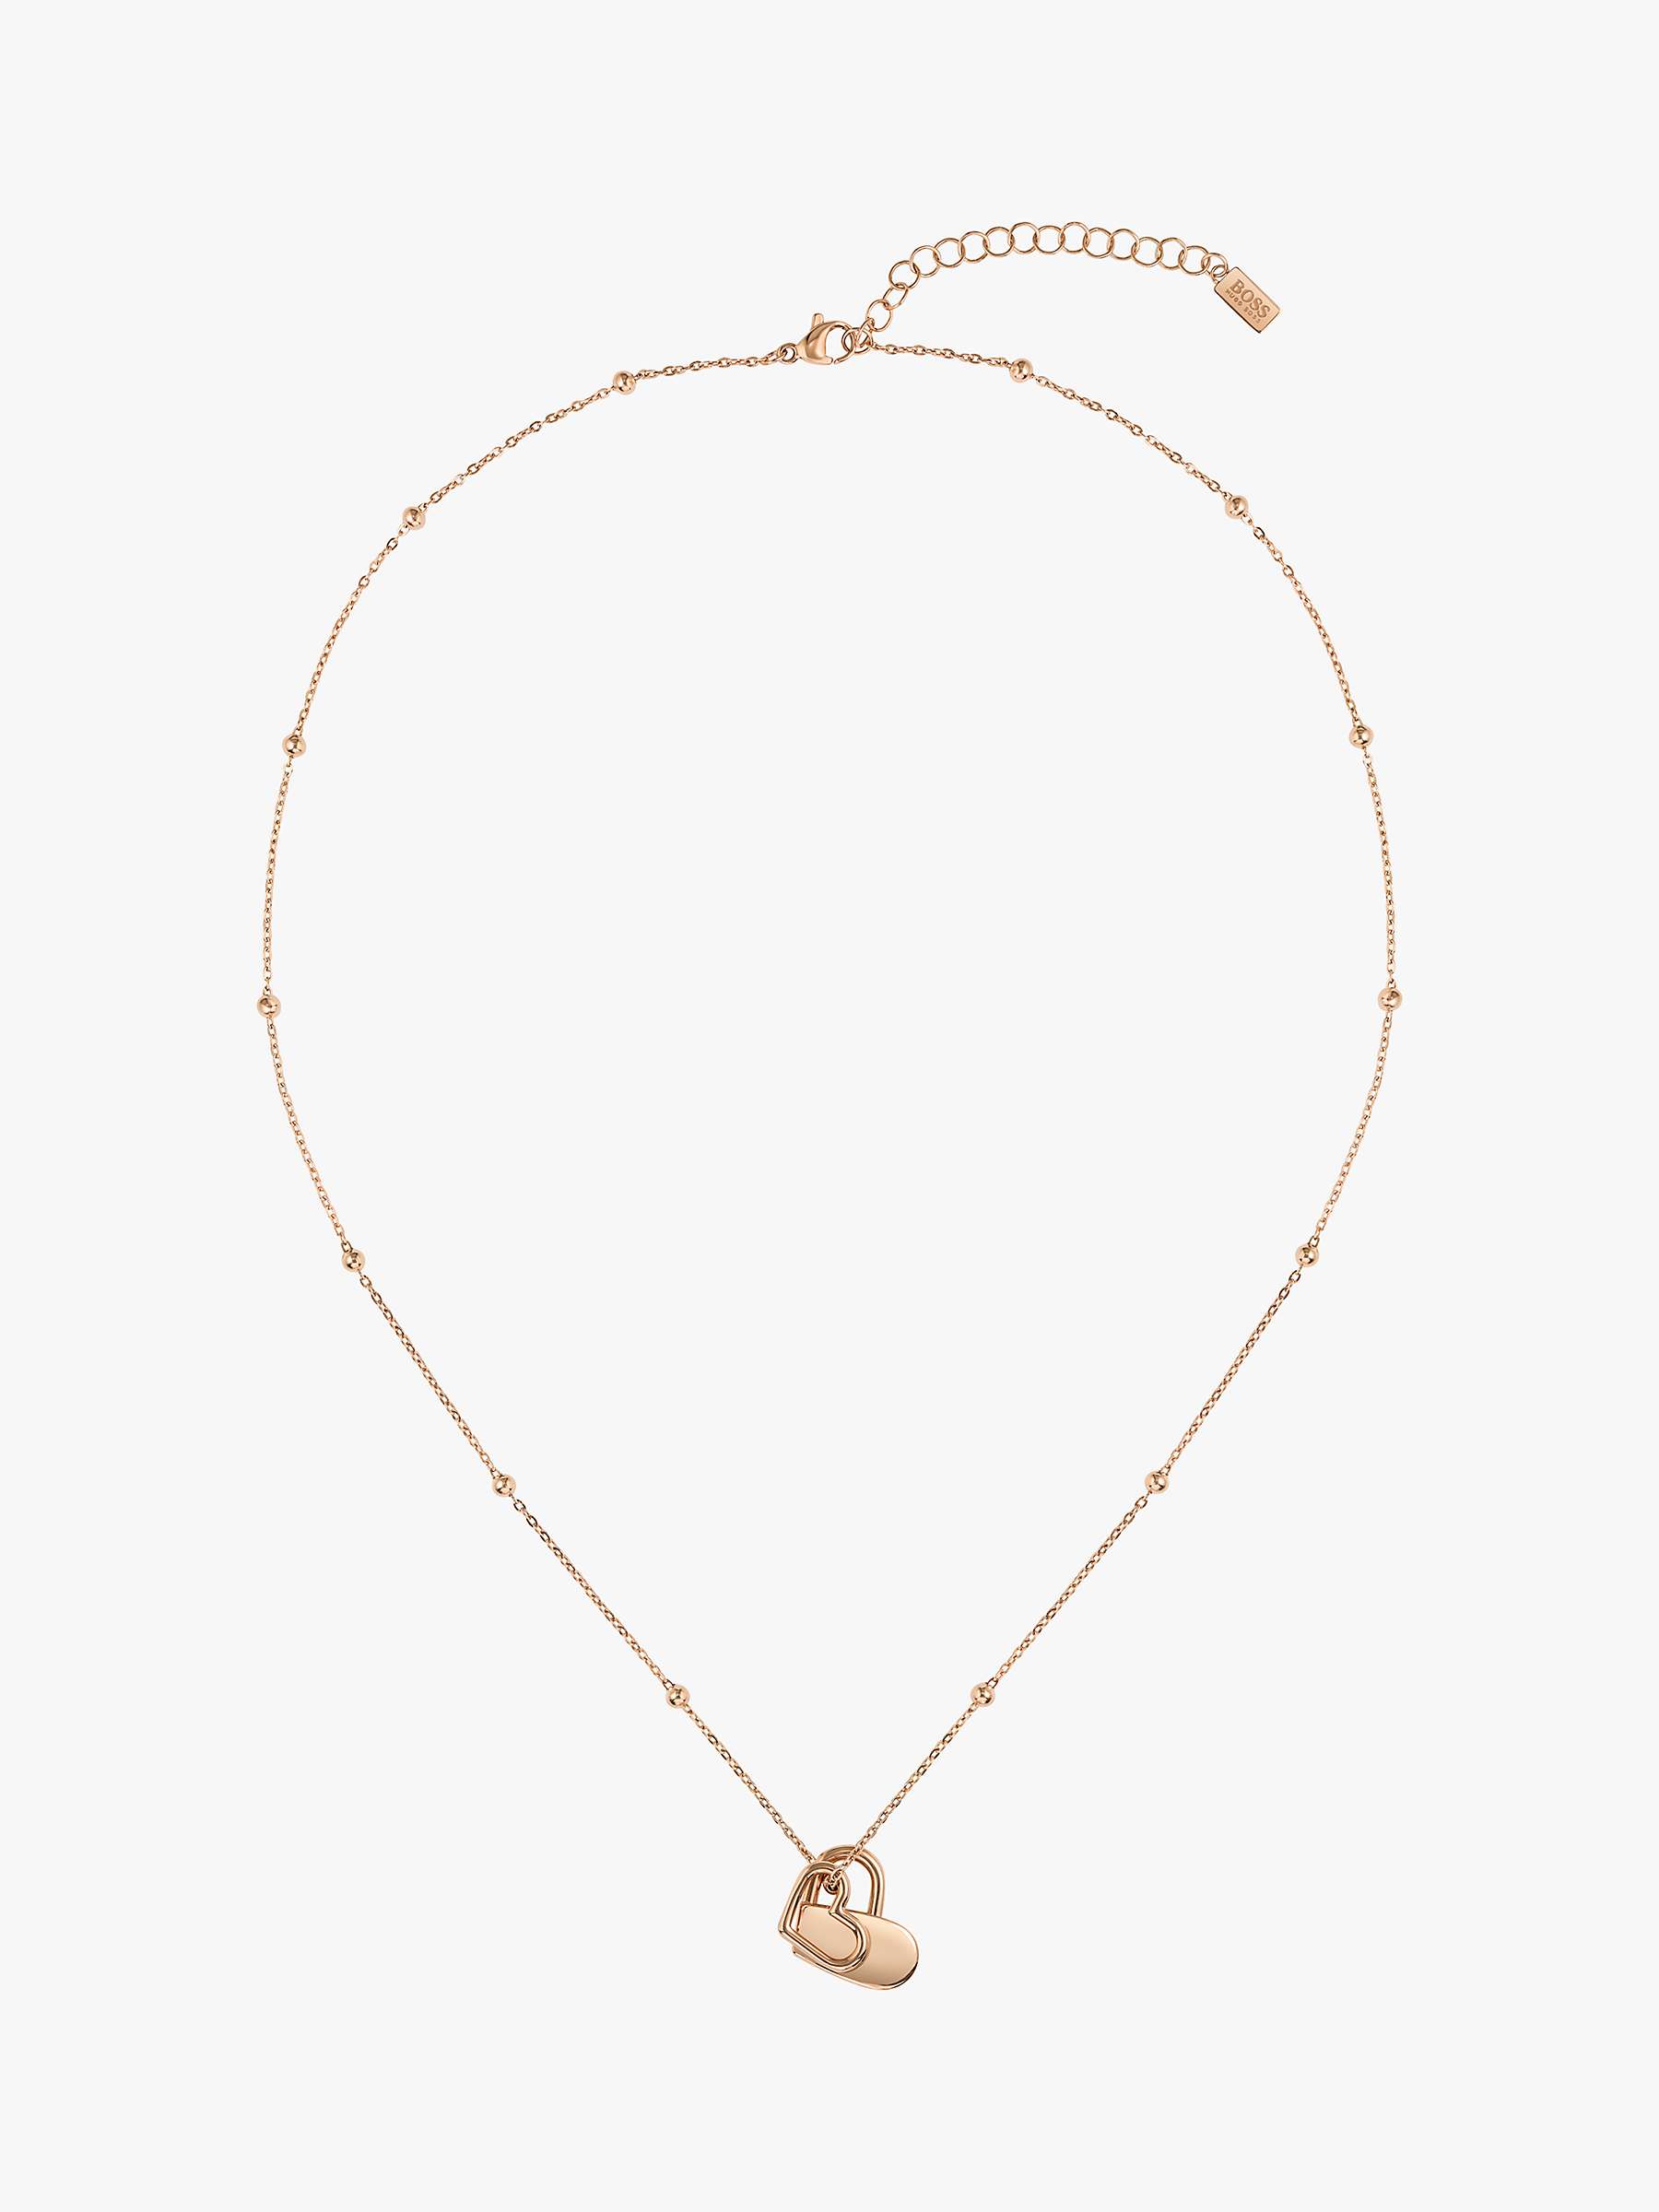 Buy BOSS Women's Soulmate Collection Double Heart Pendant Necklace, Rose Gold Online at johnlewis.com